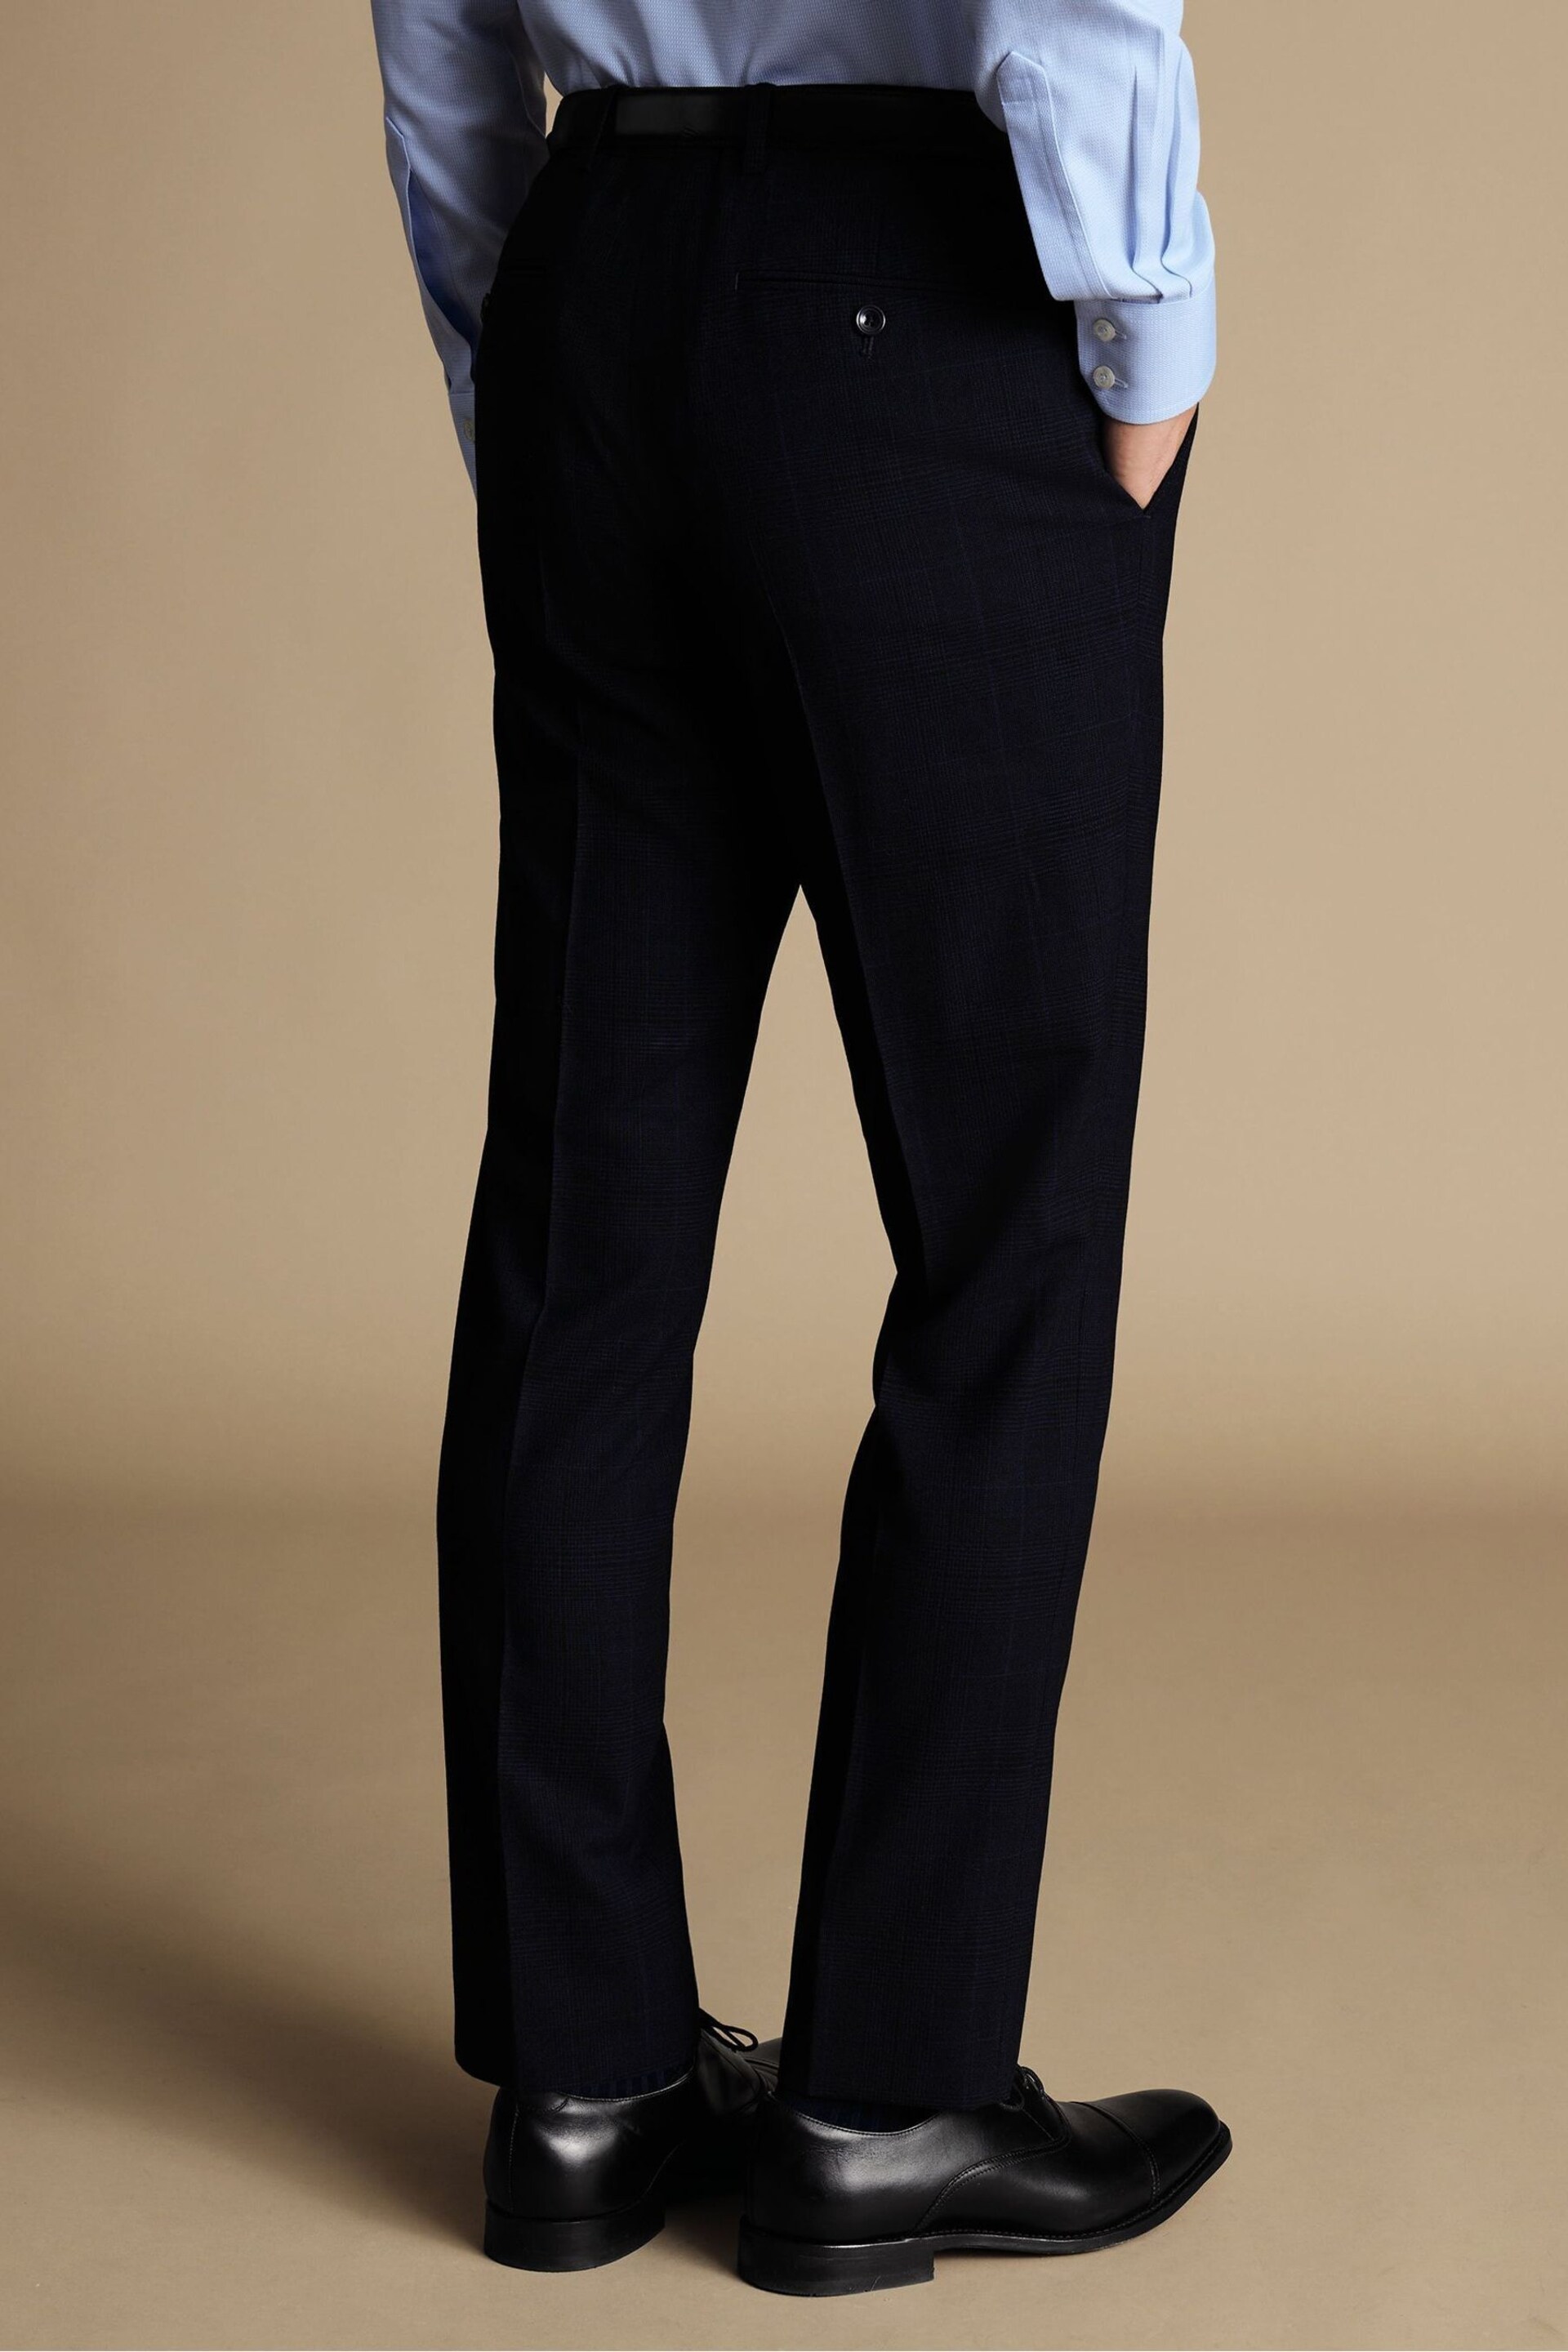 Charles Tyrwhitt Blue Slim-Fit Prince of Wales Ultimate Performance Suit Trousers - Image 2 of 3